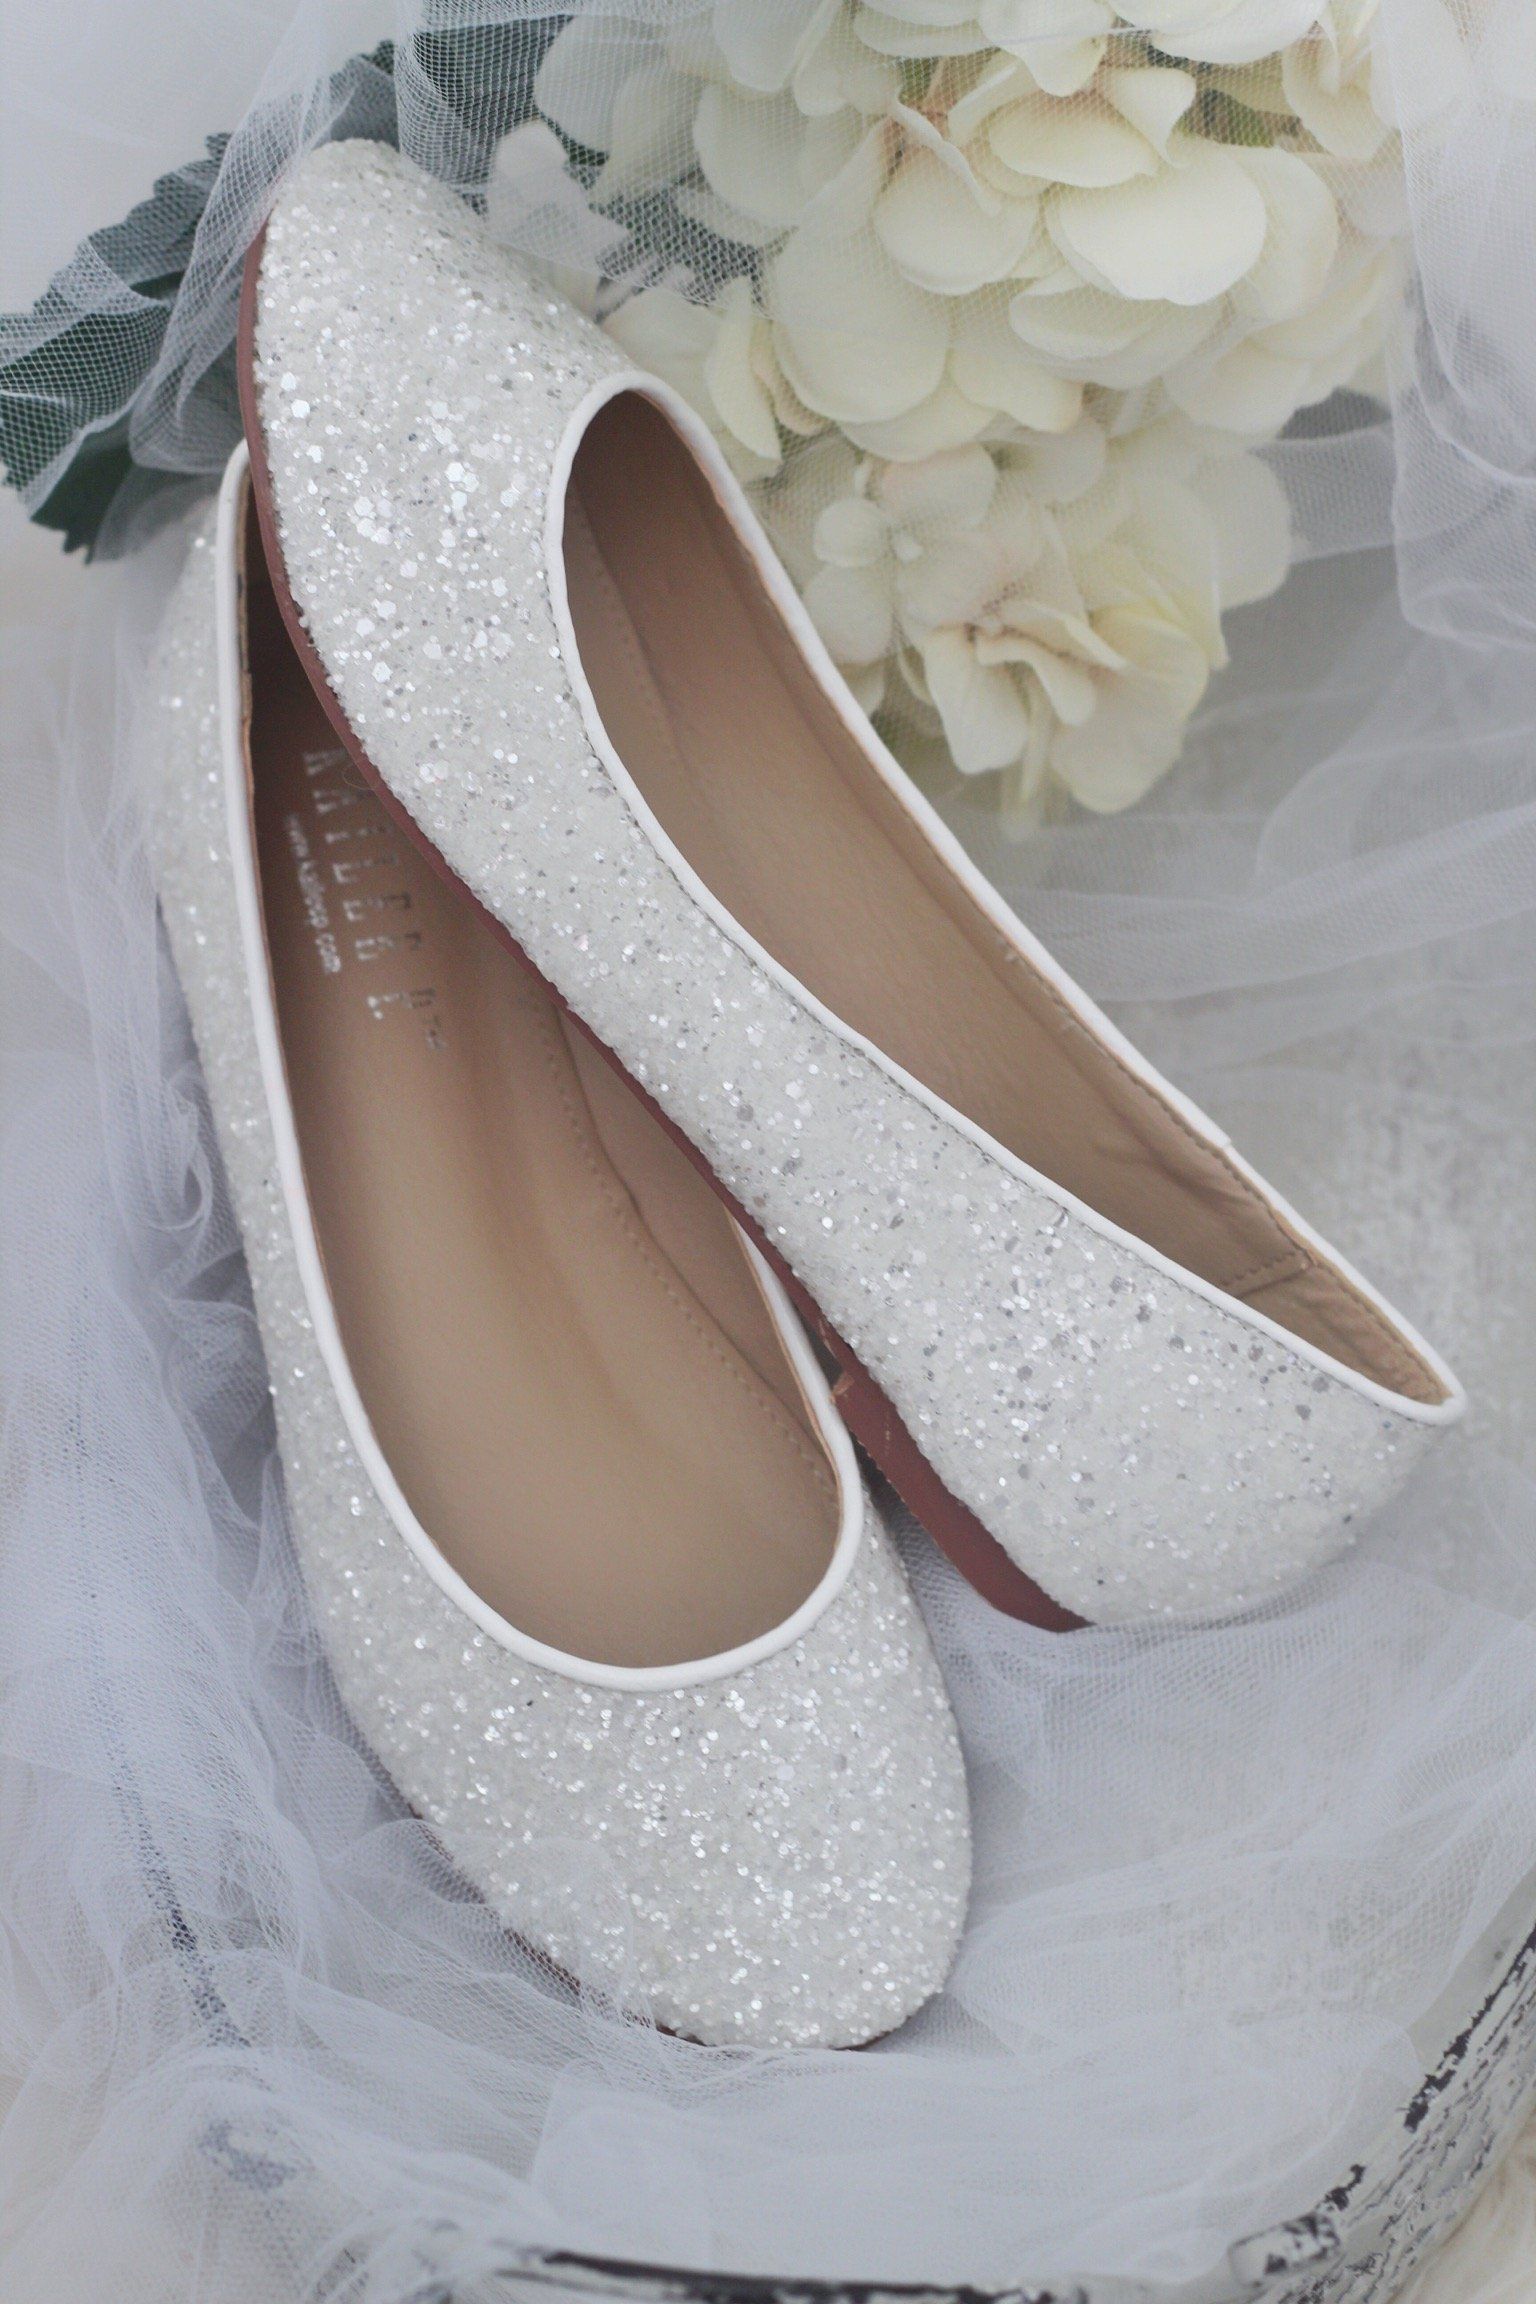 Get stylish glitter flats for attraction